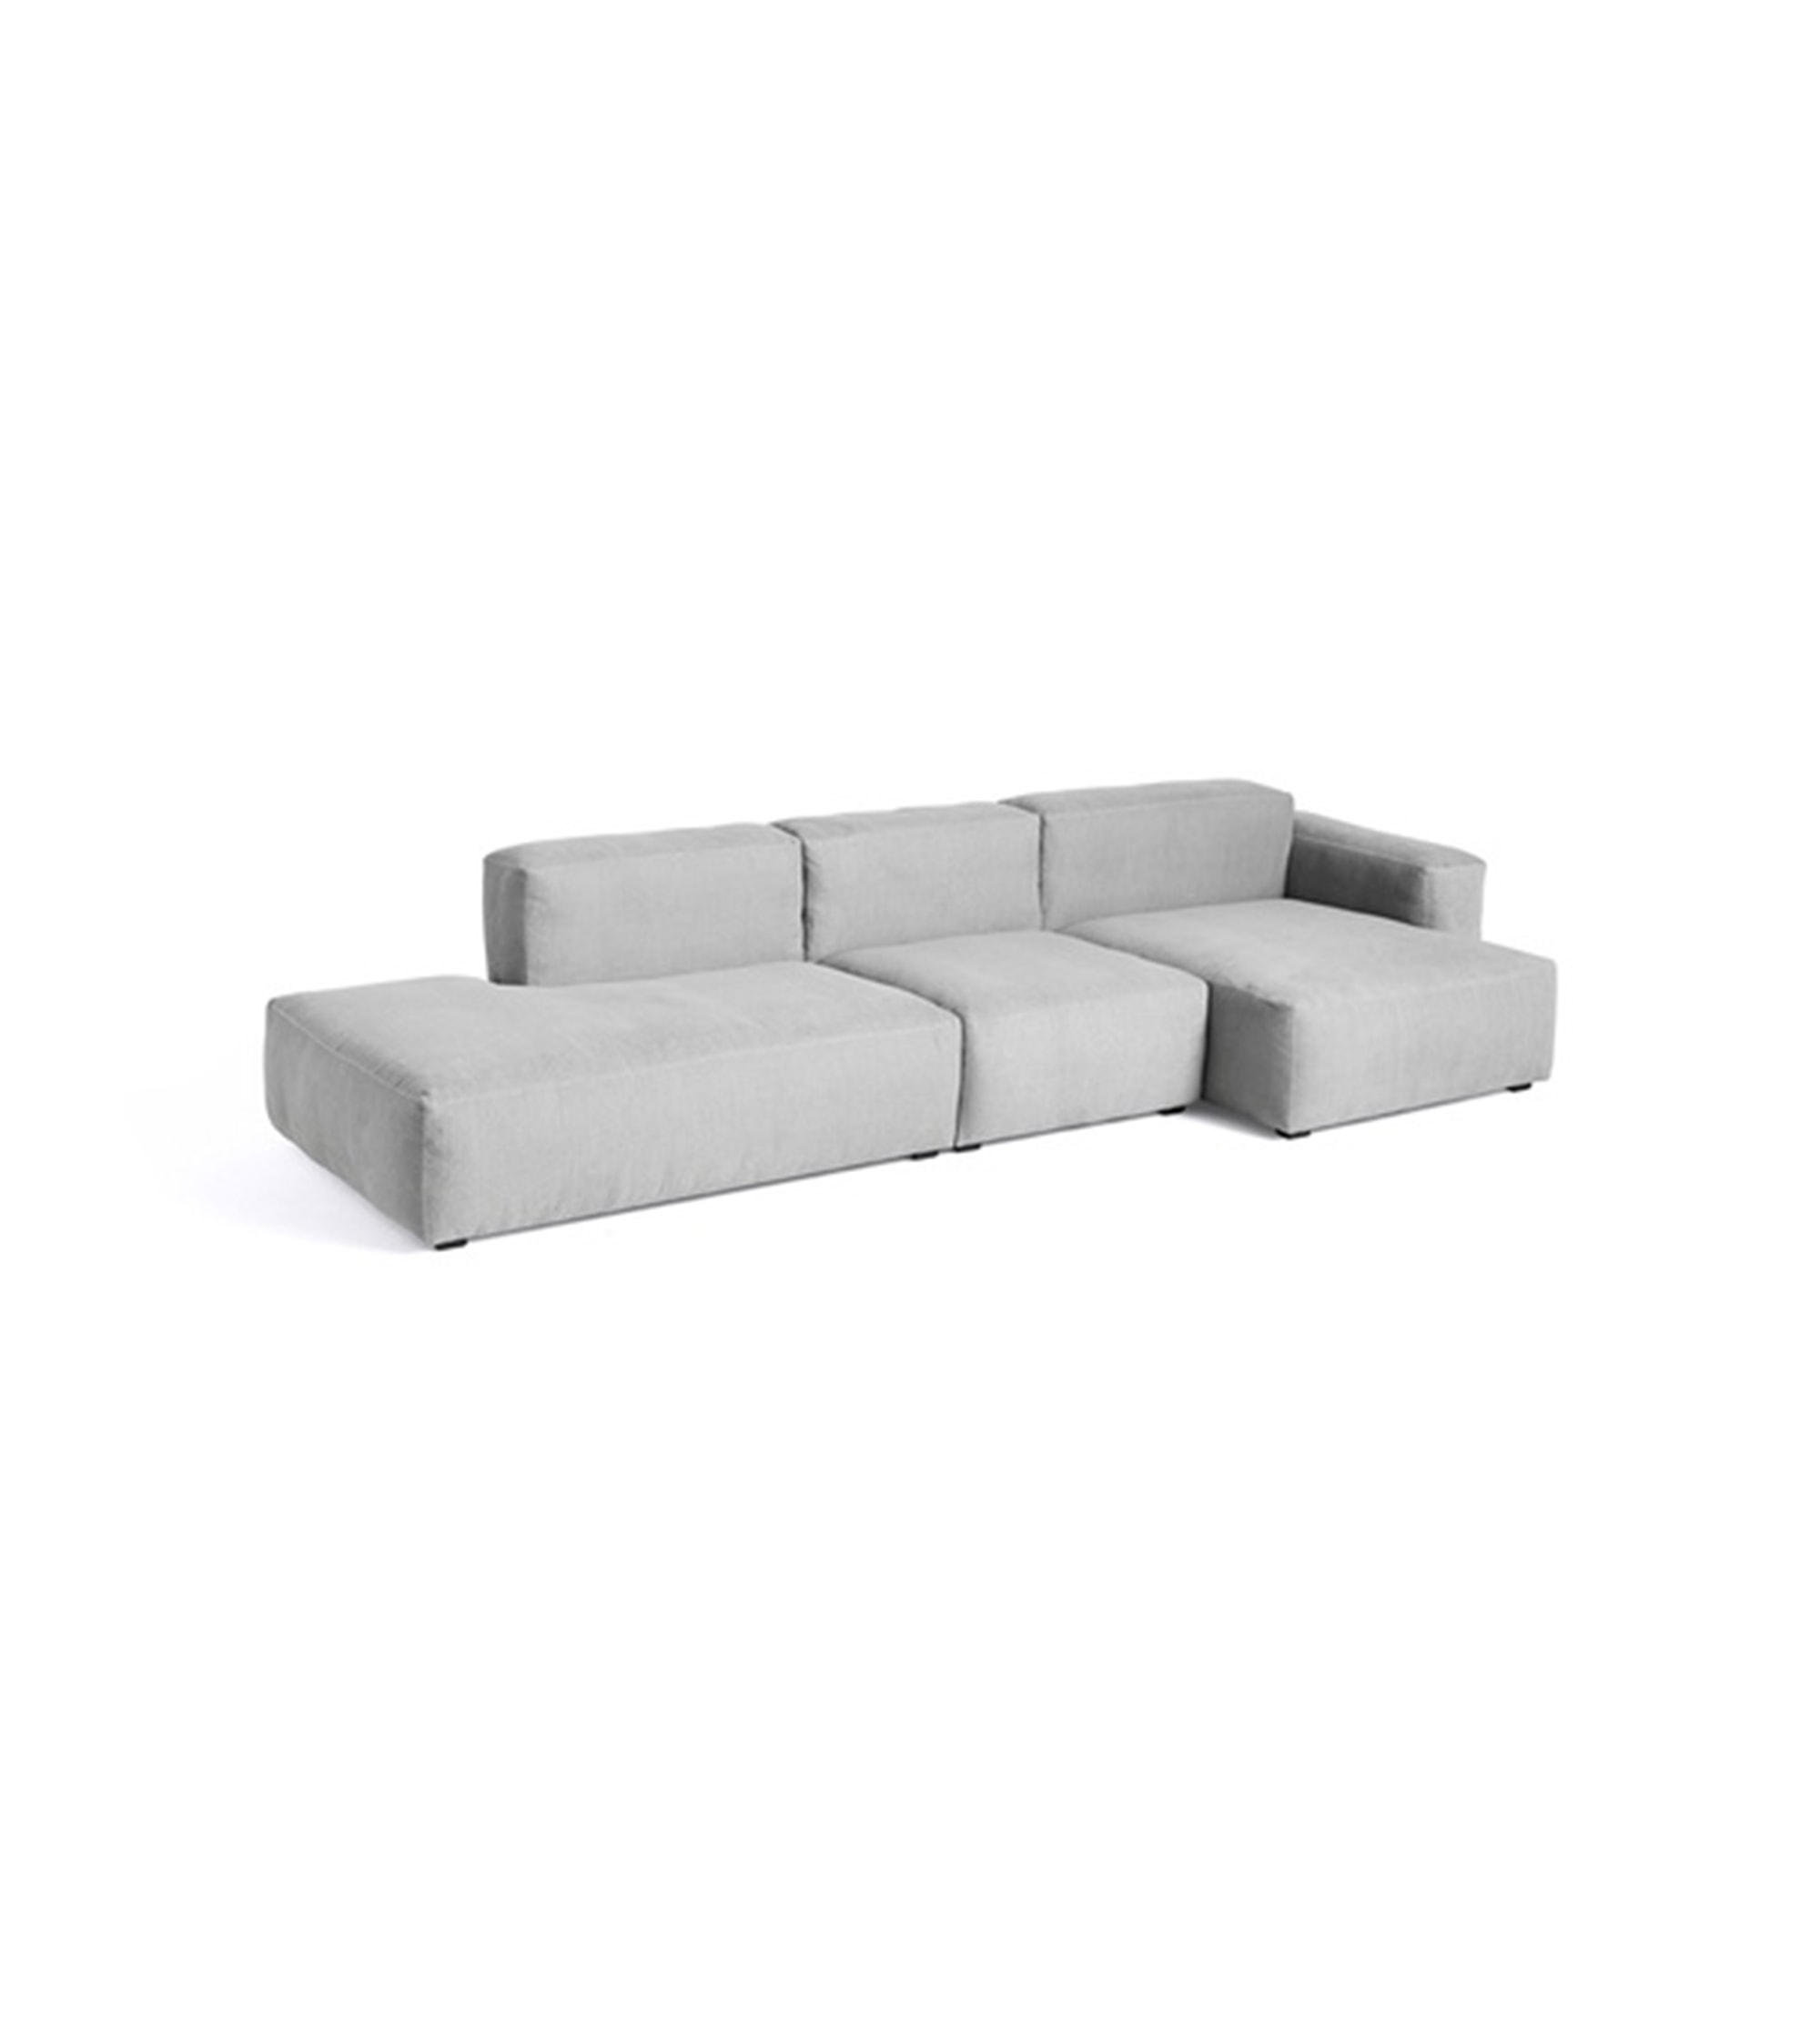 MAGS SOFT 3 SEATER COMBINATION 4 LOW ARMREST